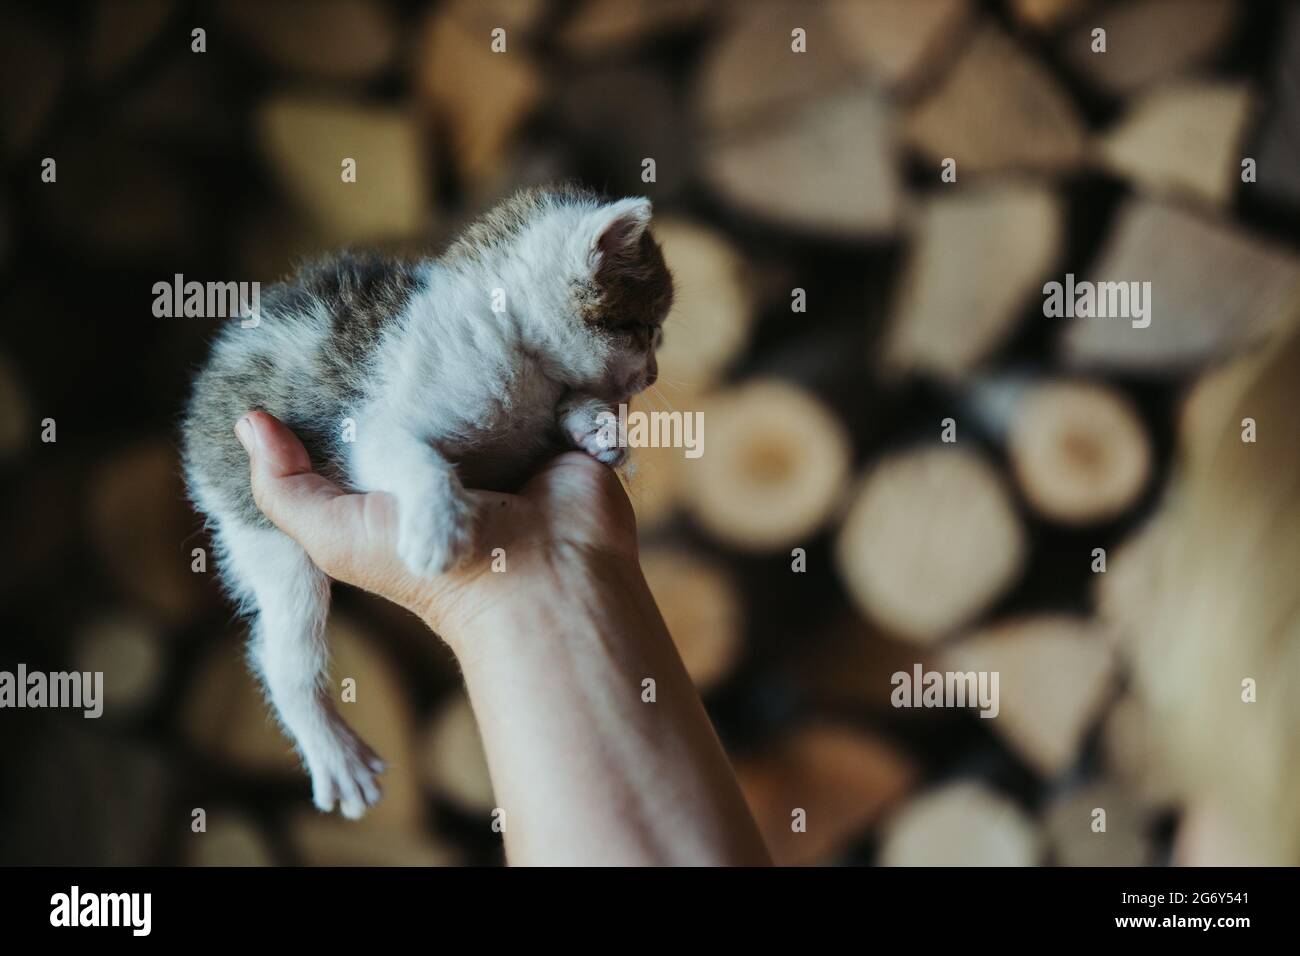 Closeup of a person holding an adorable fluffy small colorful  kitten Stock Photo